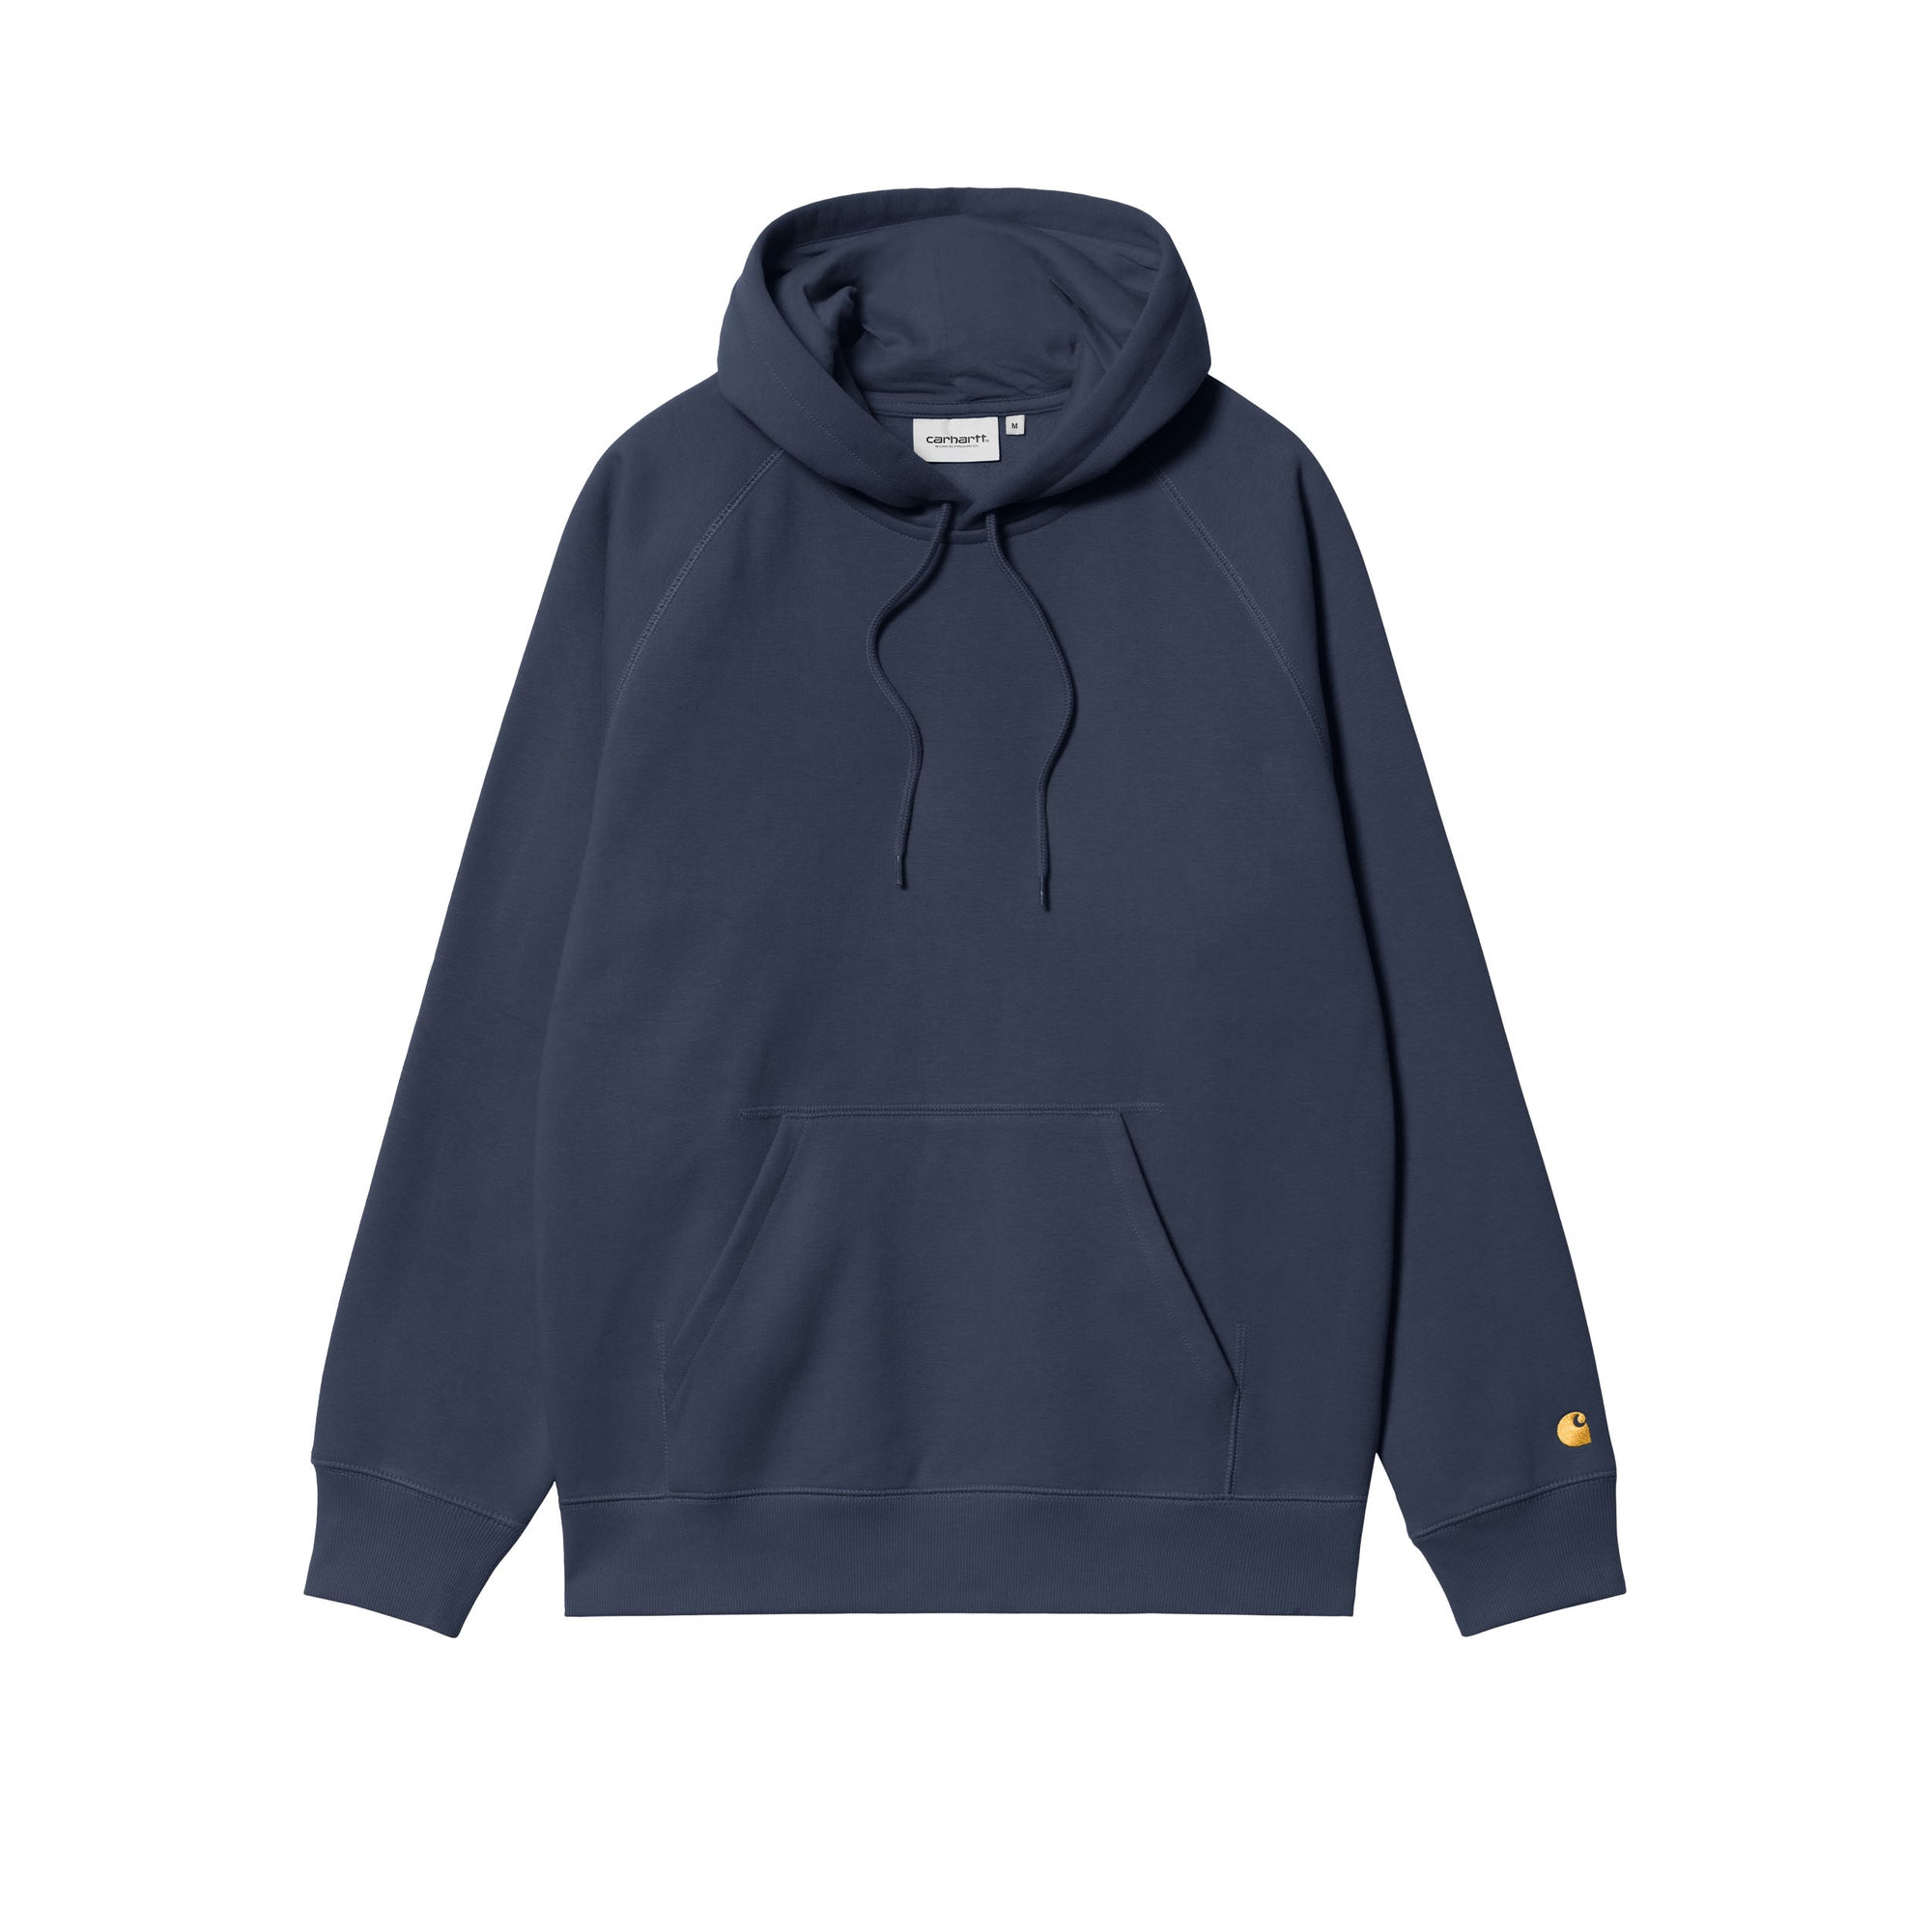 Carhartt WIP Hooded Chase Sweat (blue/gold) - Blue Mountain Store